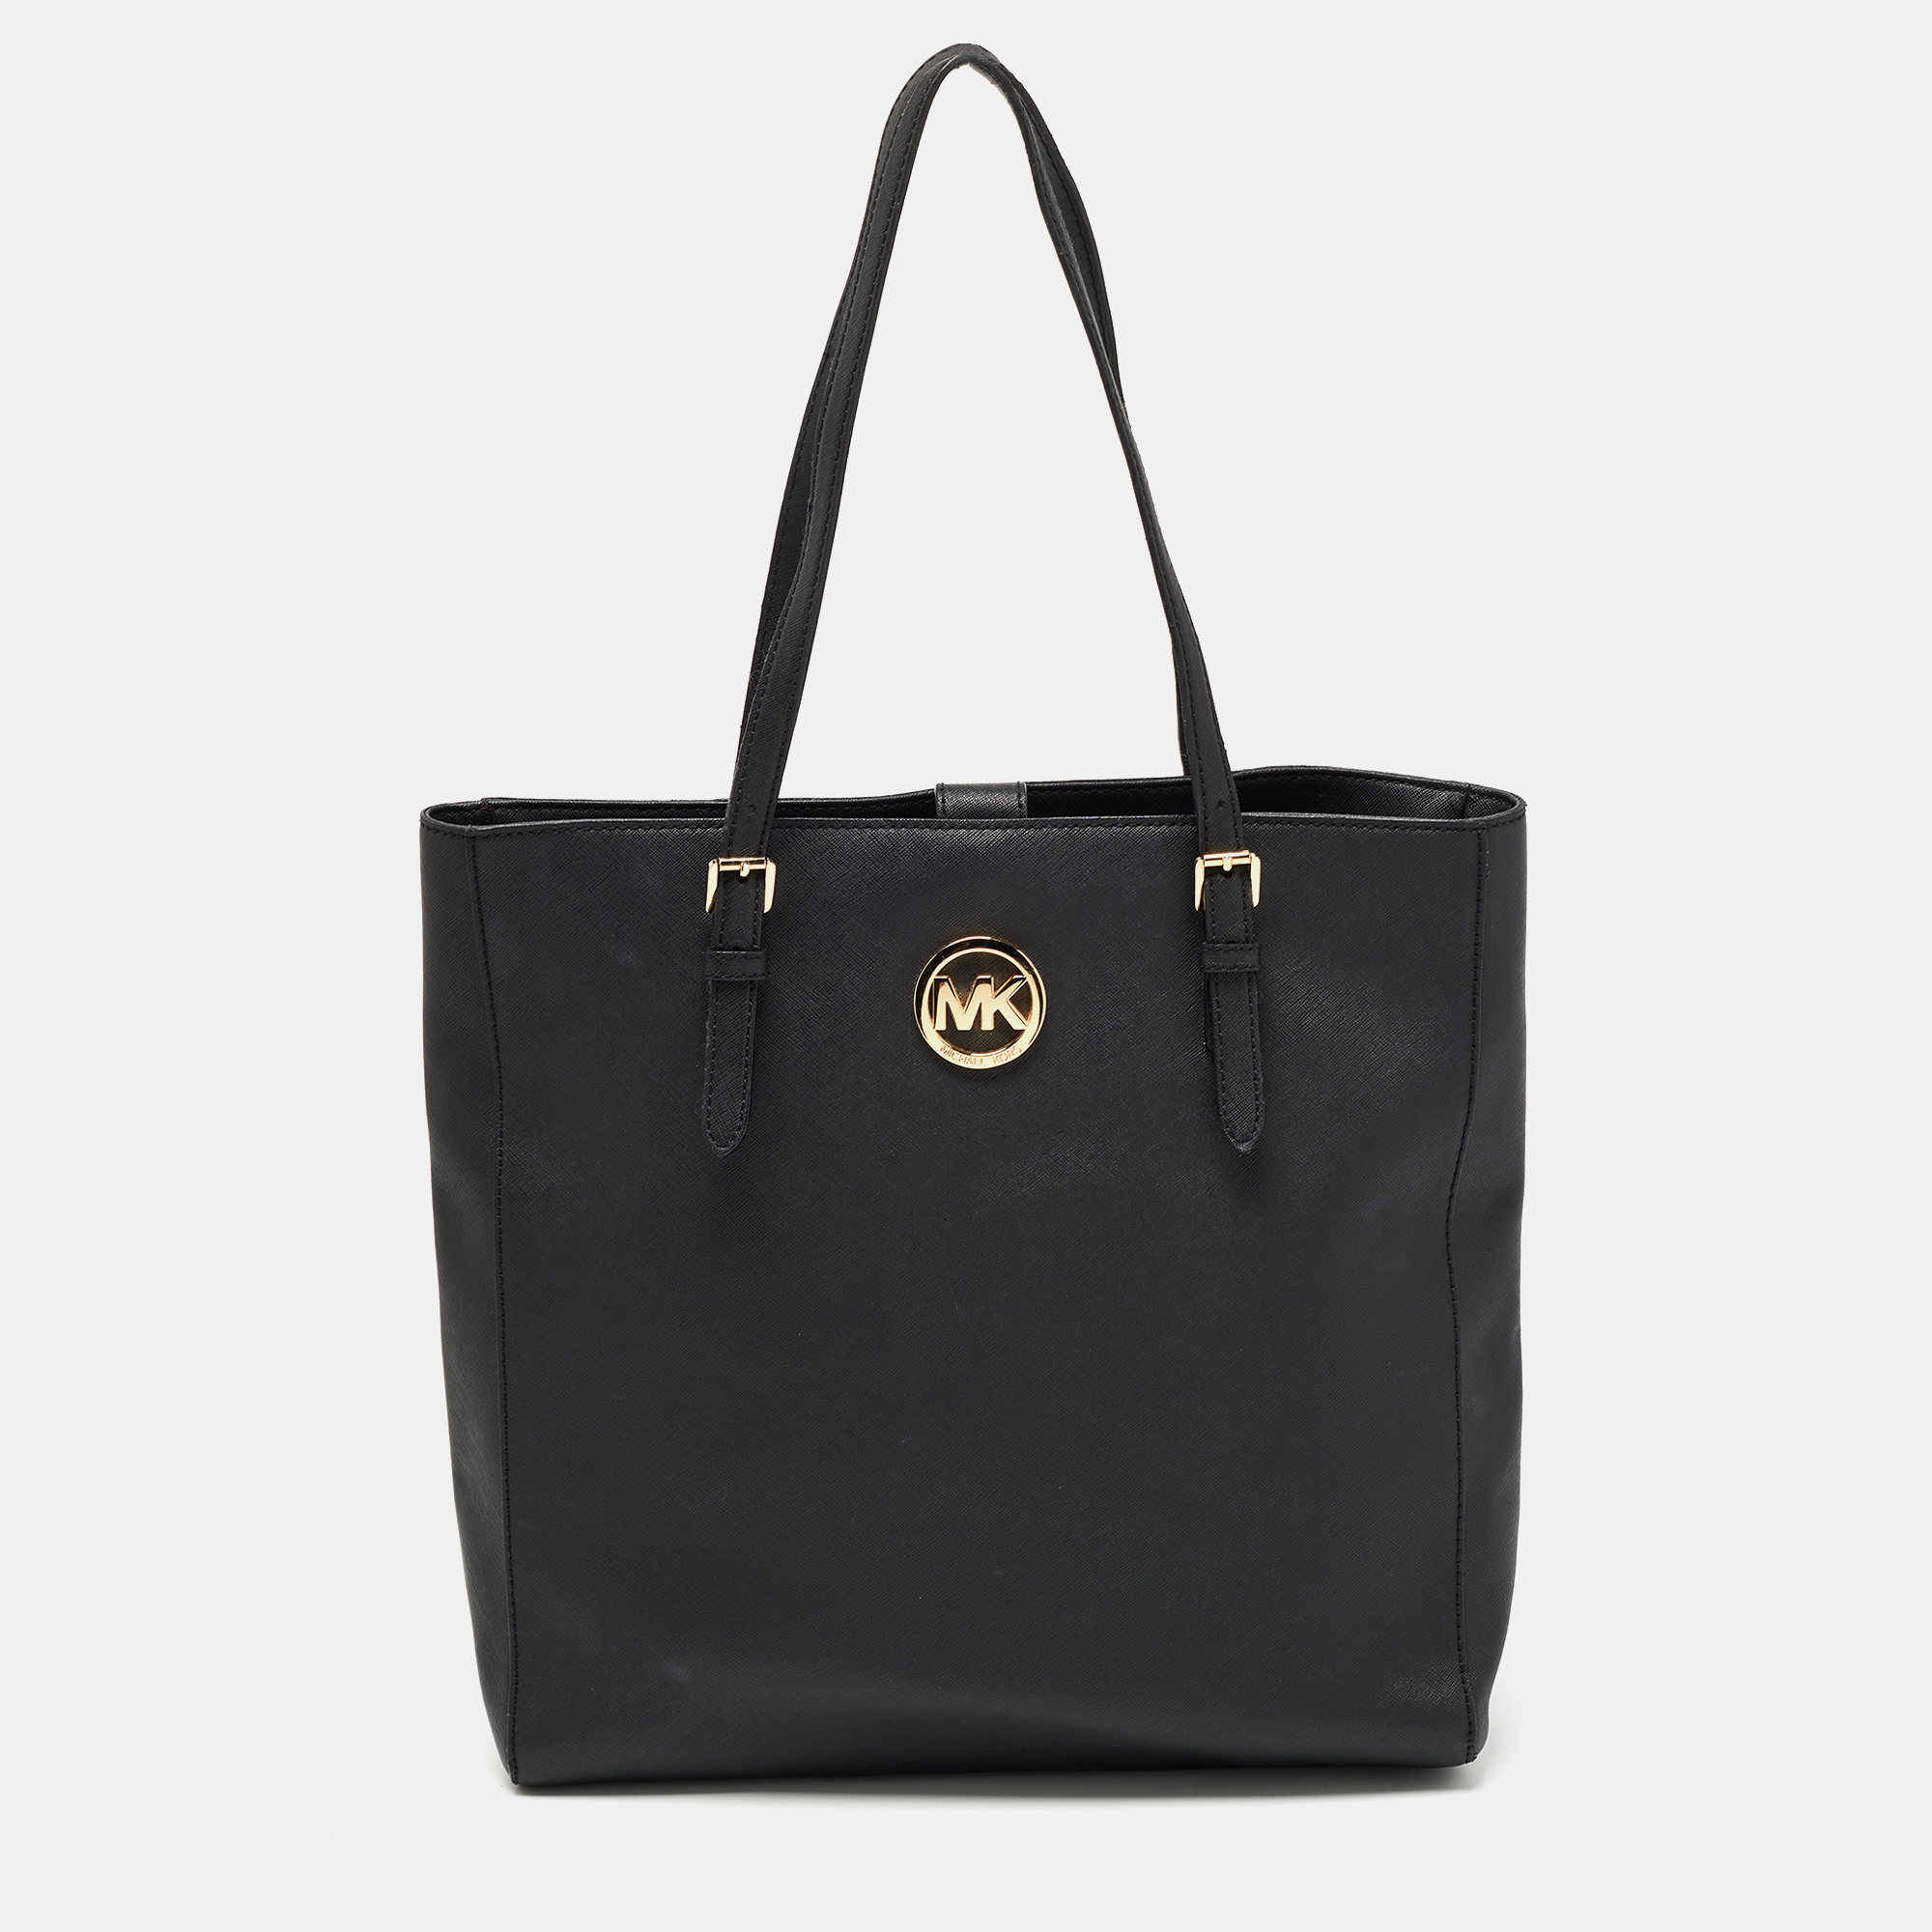 Pre-owned Michael Michael Kors Black Saffiano Leather Tote